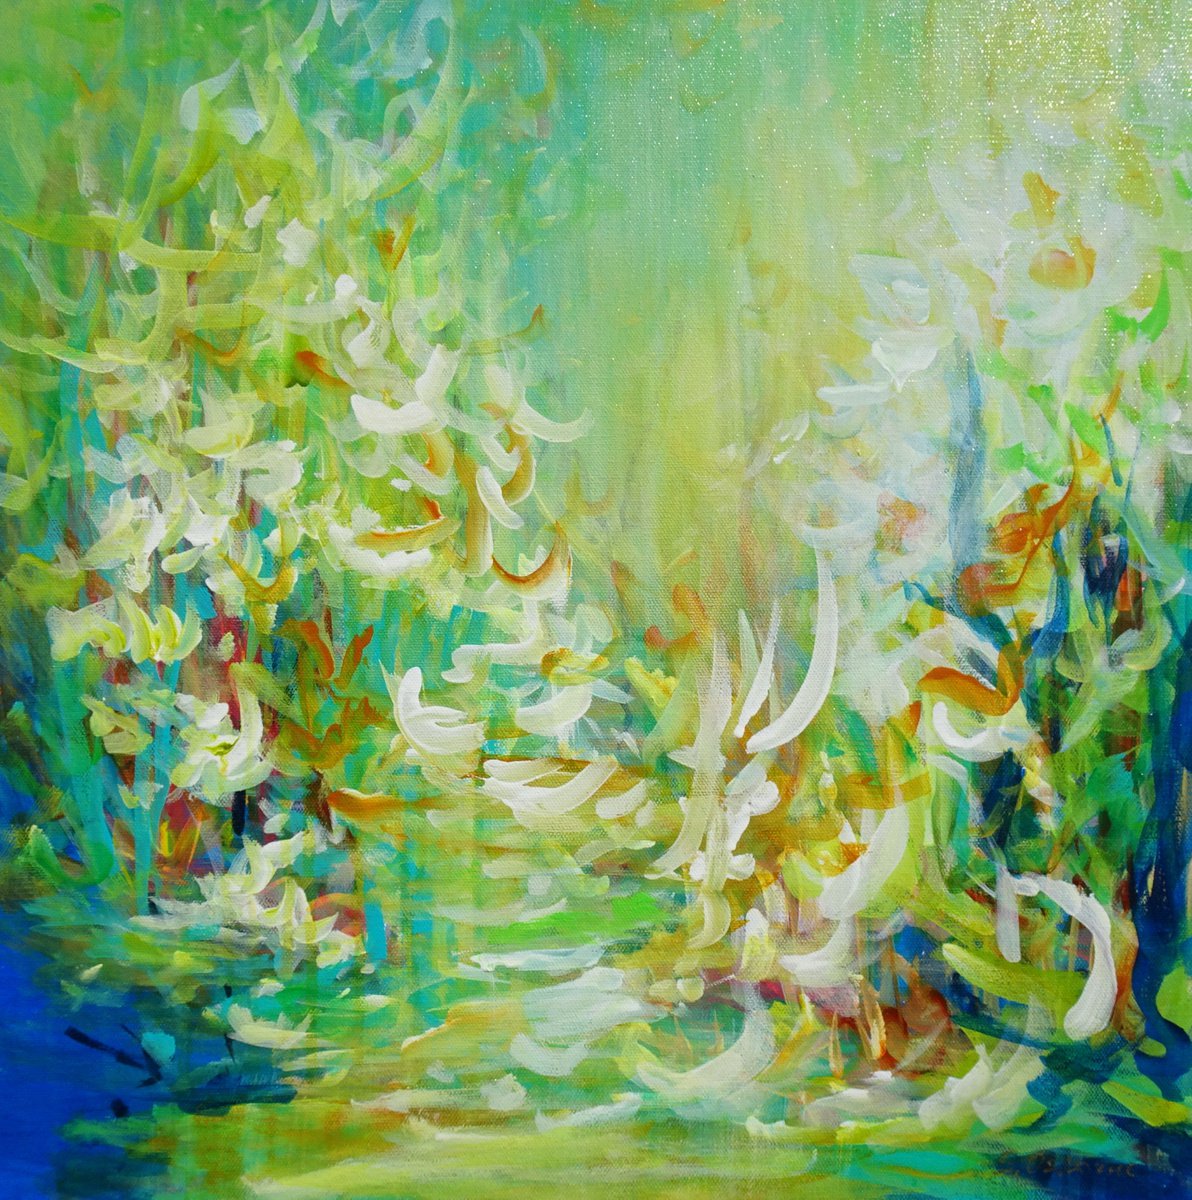 Abstract Forest Pond Painting. Floral Garden. Abstract Tropical Flowers and Birds. Origina... by Sveta Osborne